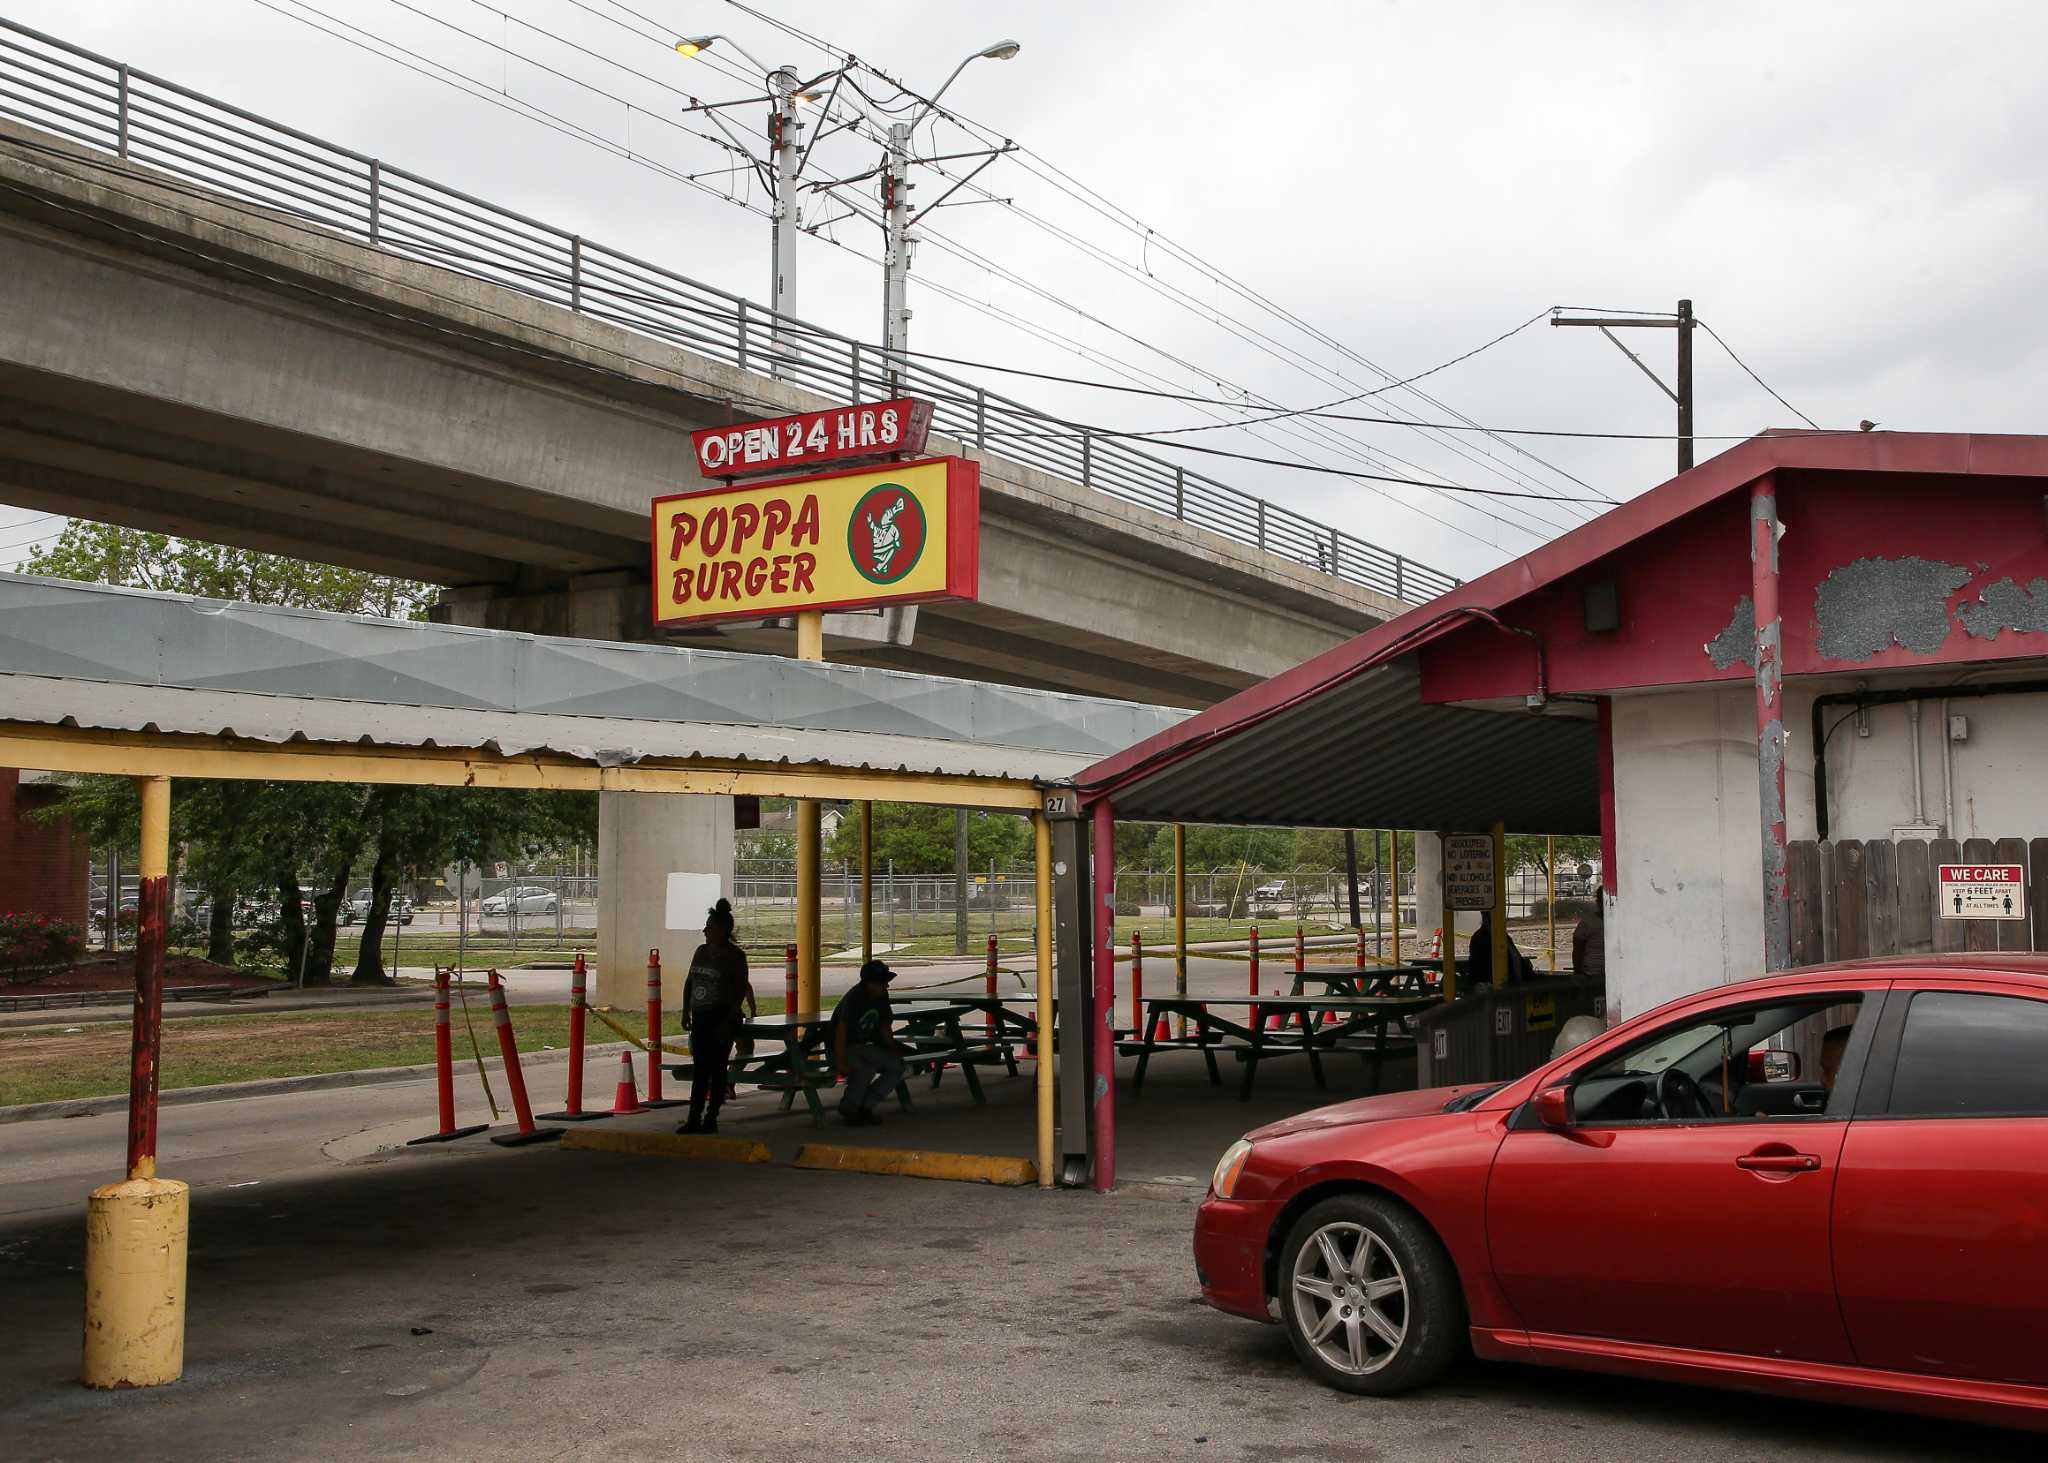 Beloved by Northside residents for 60 years, Poppa Burger stands